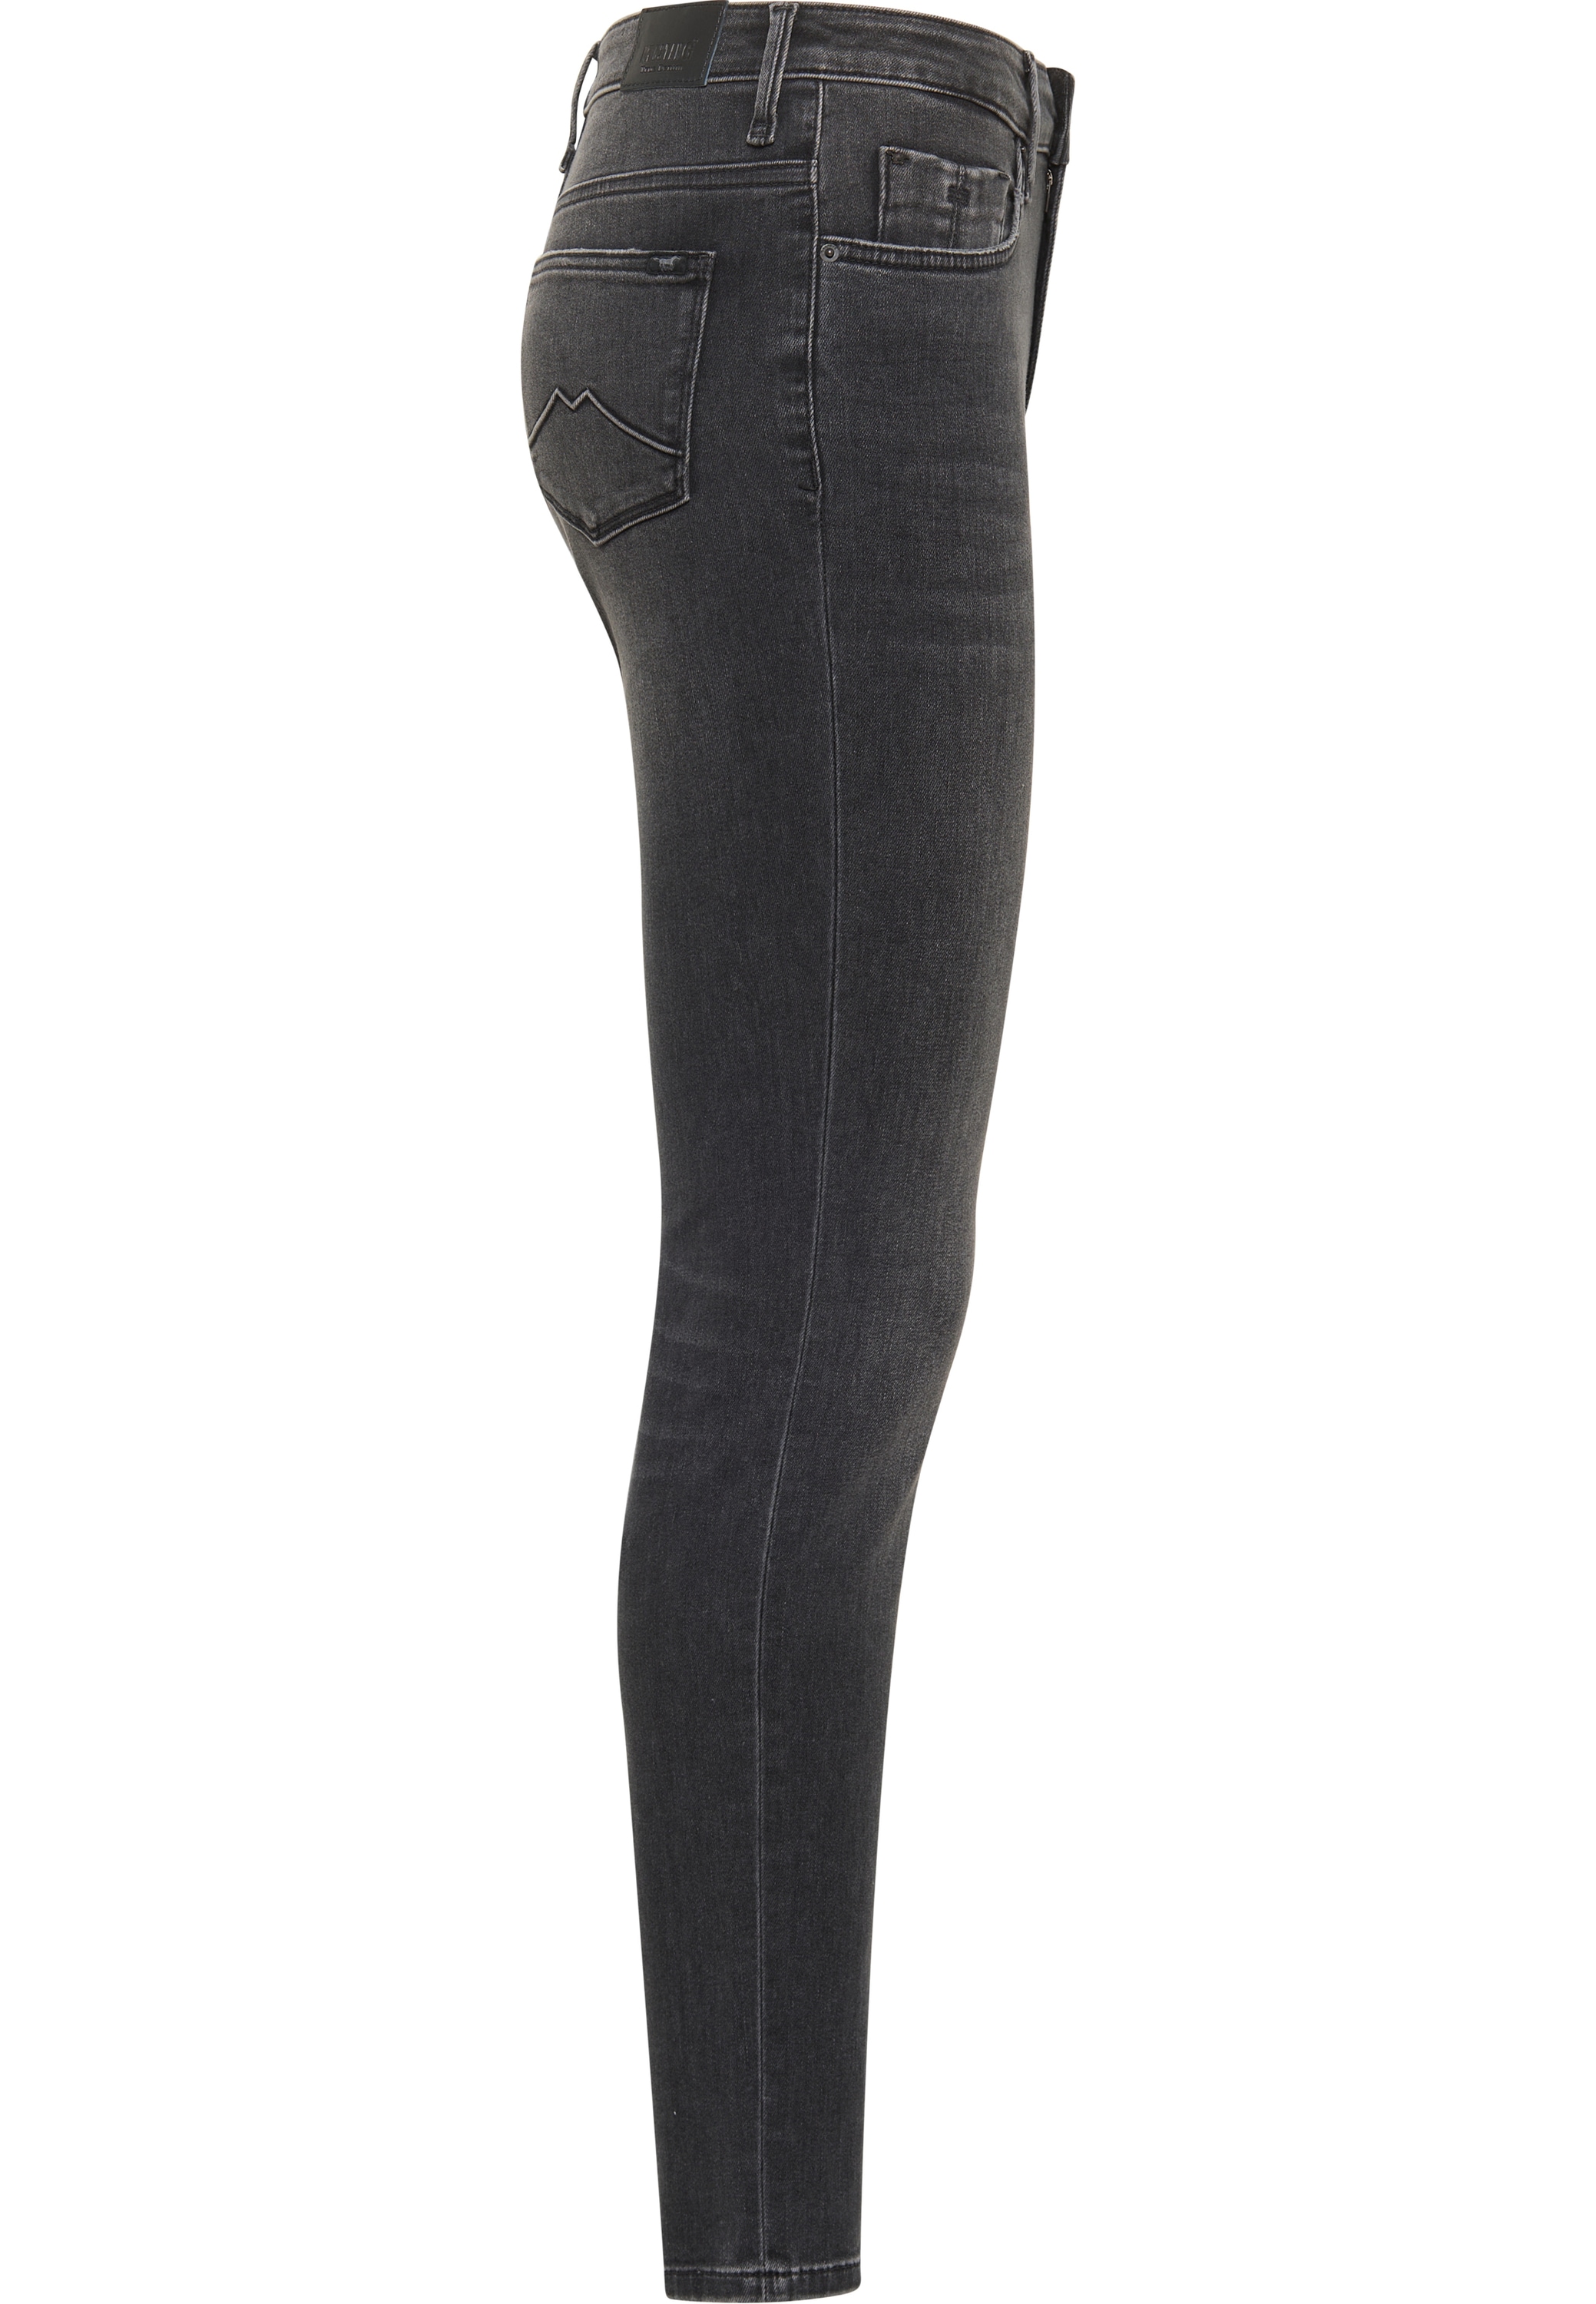 MUSTANG Jeansjeggings »Mia Jeggings« bei ♕ | Stretchjeans